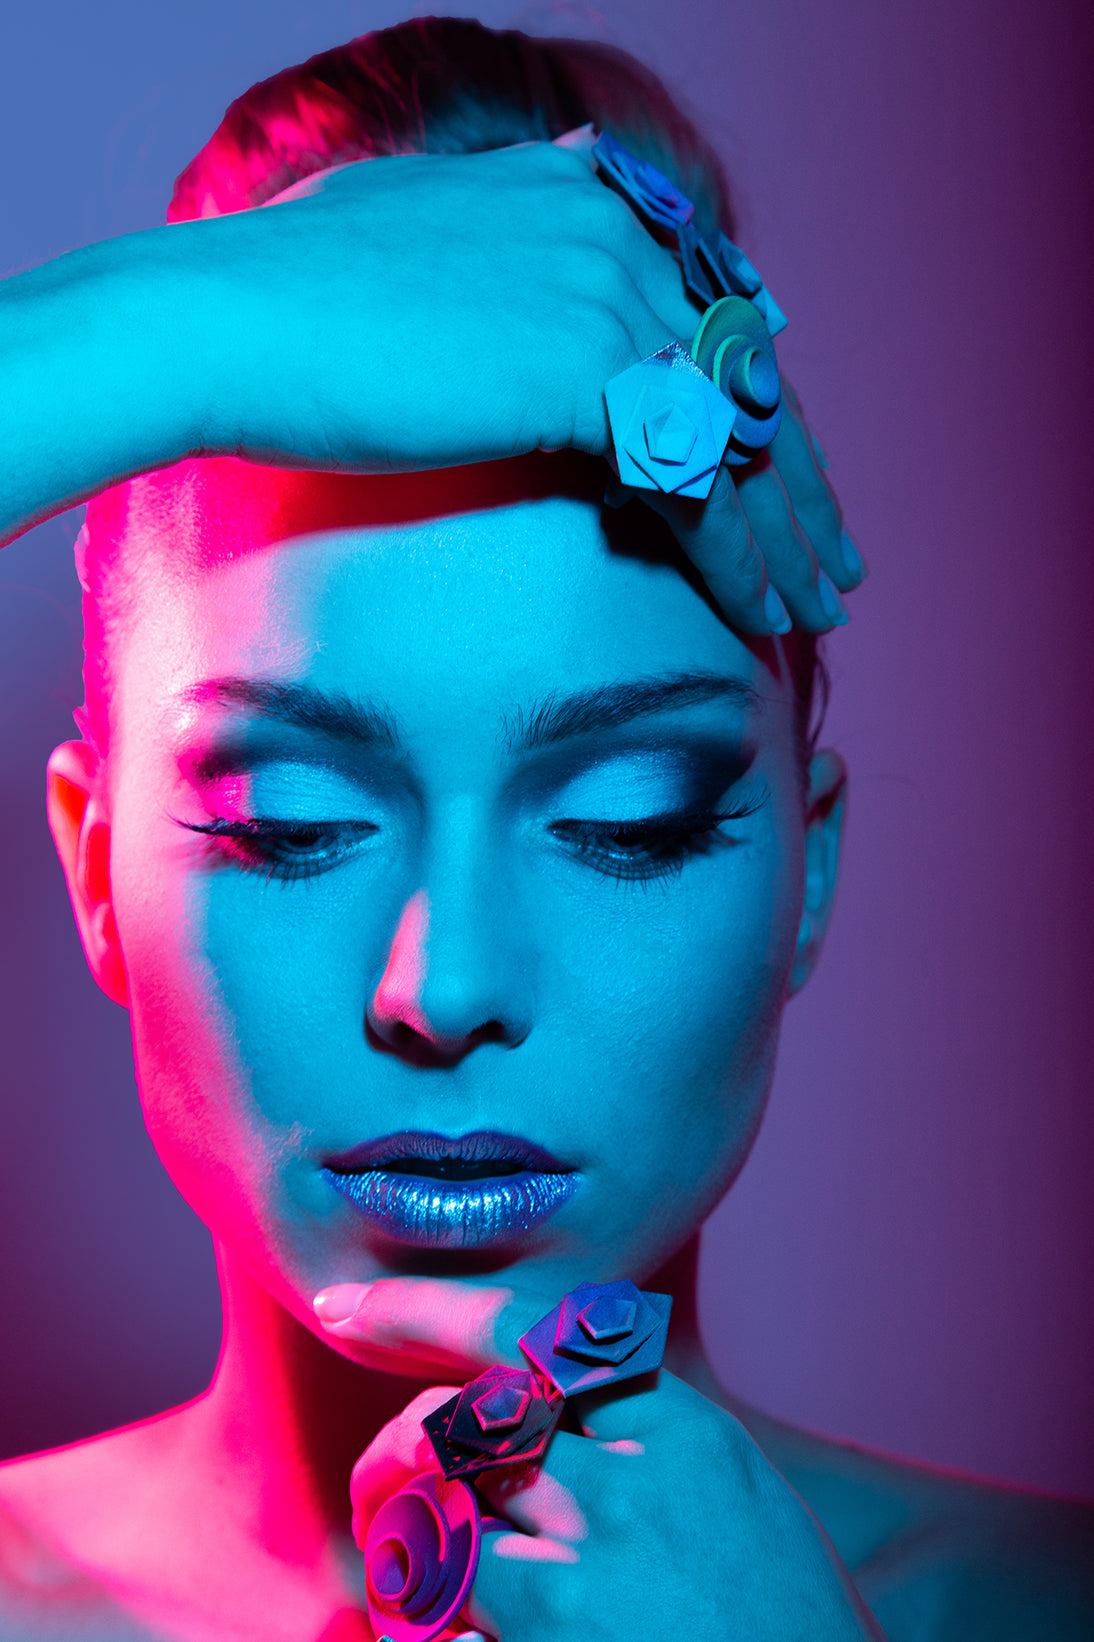 Colour Filter Photography On Model Wearing Teal And Aqua Jewelry By Varily Jewelry 